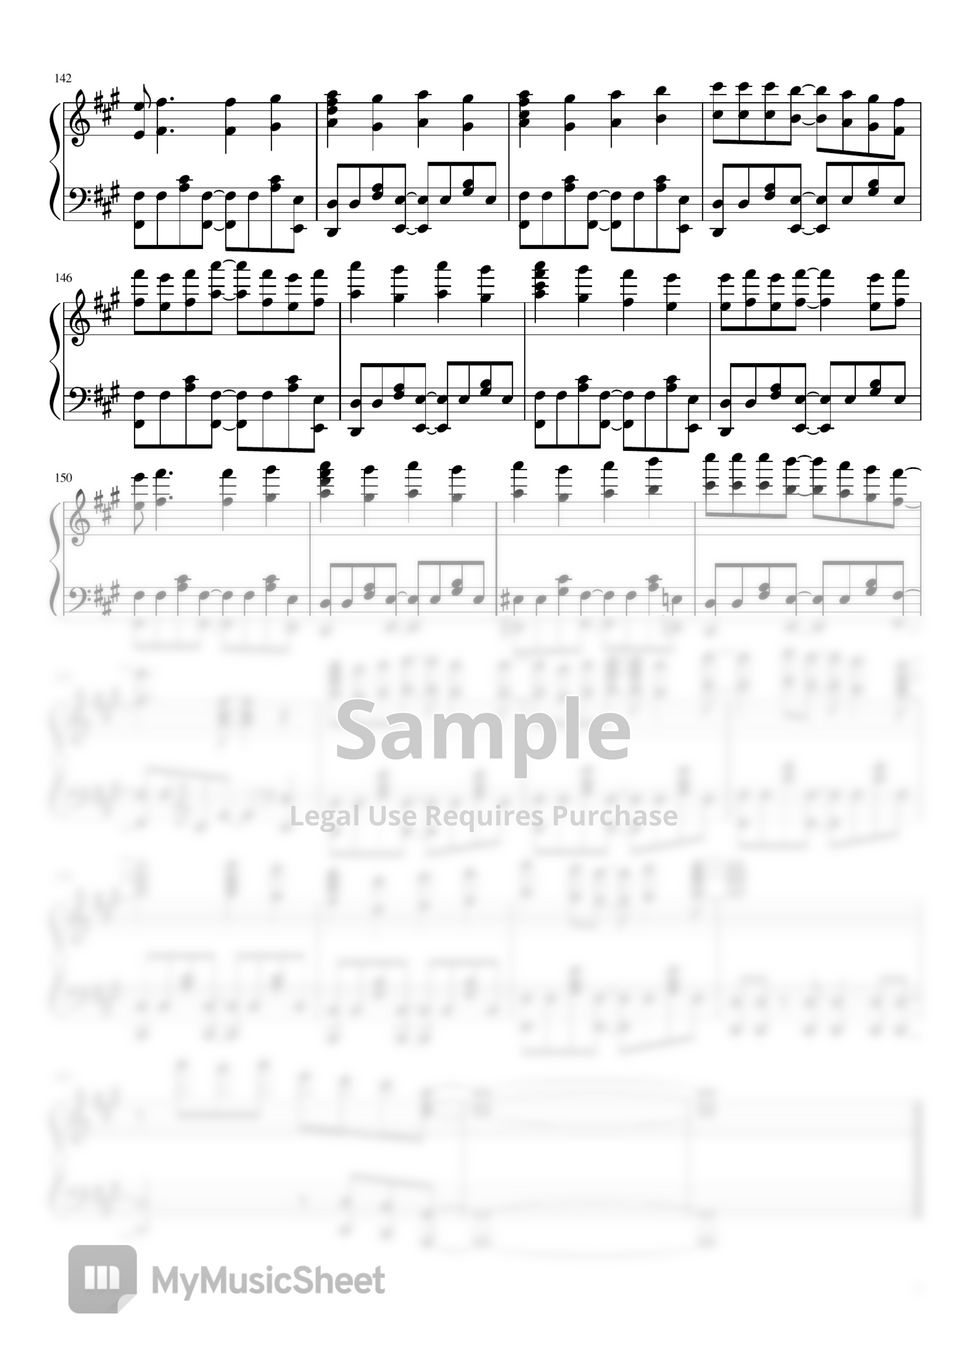 Hikaru Nara-Your Lie in April OP Stave Preview  Your lie in april, You  lied, Piano sheet music